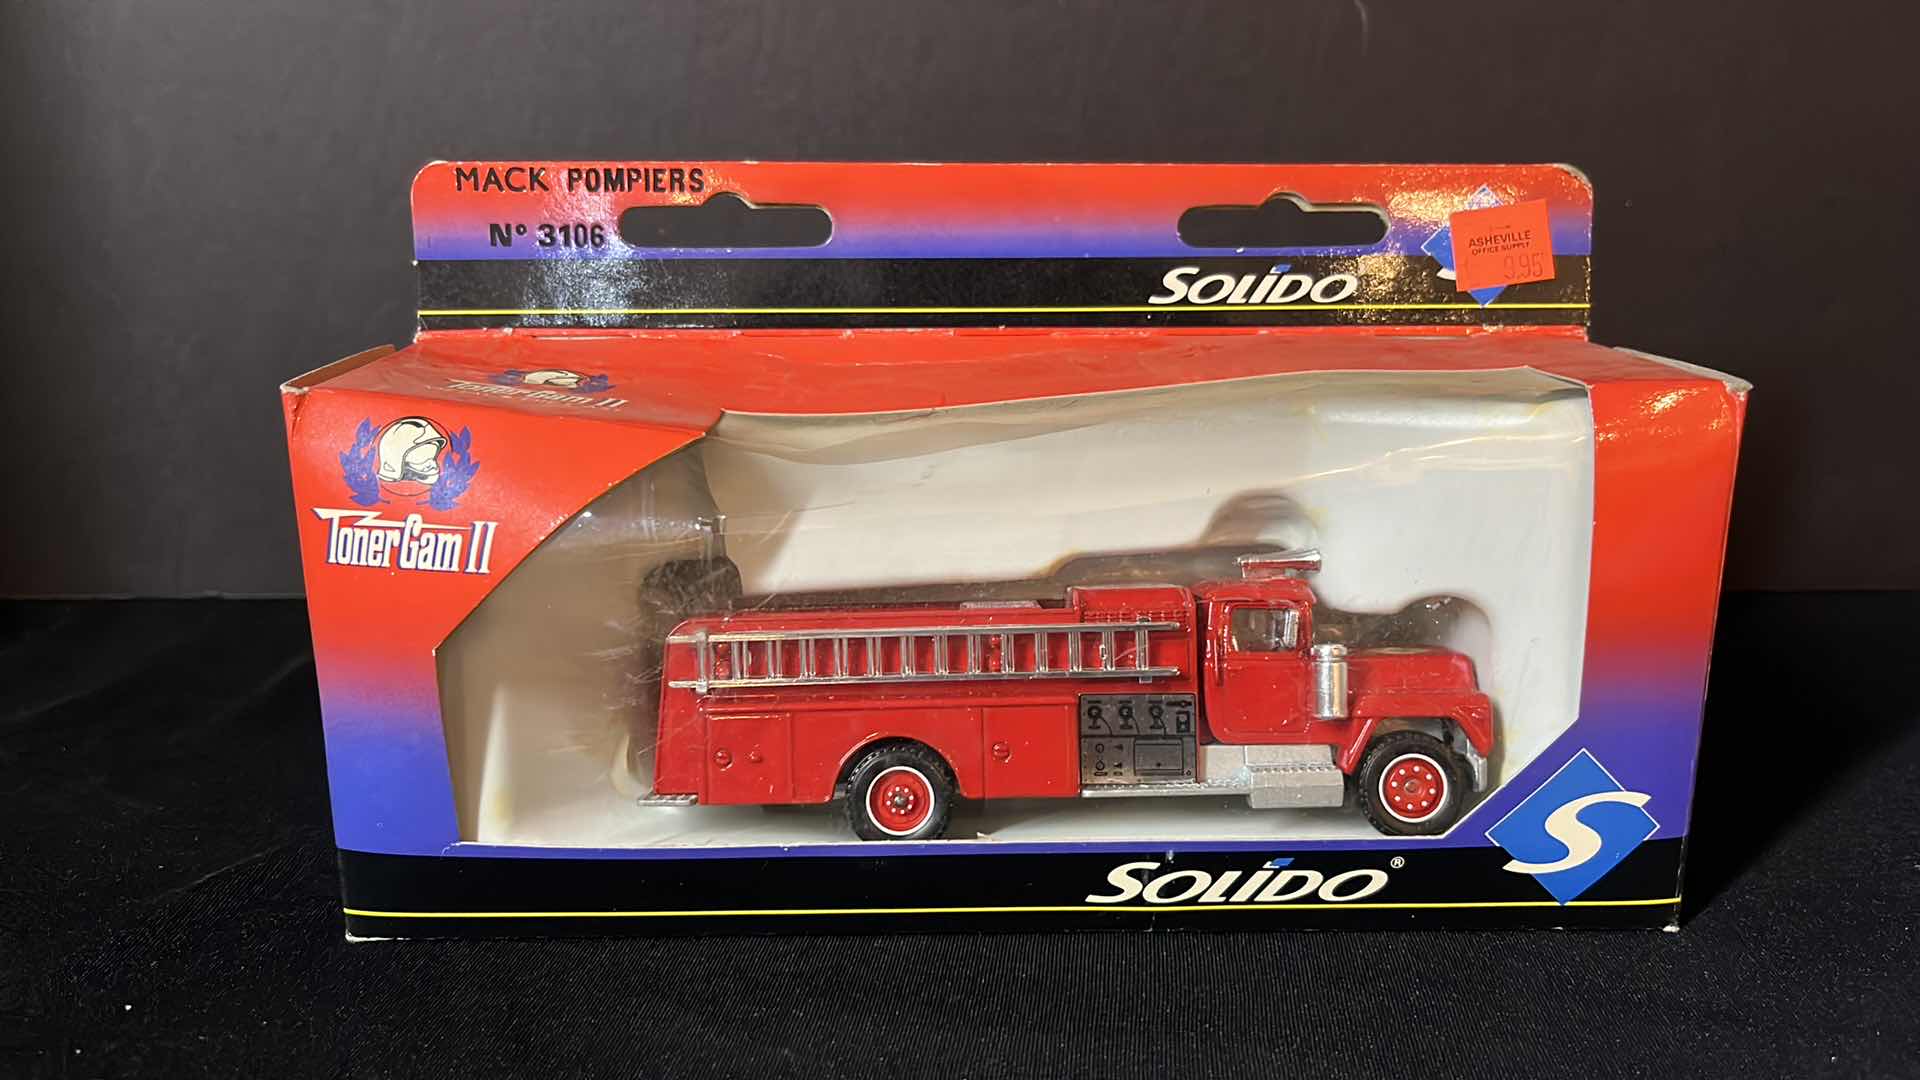 Photo 1 of SOLIDO TONER GAM II DIE-CAST METAL FIRE TRUCK, MADE IN FRANCE 5.5”